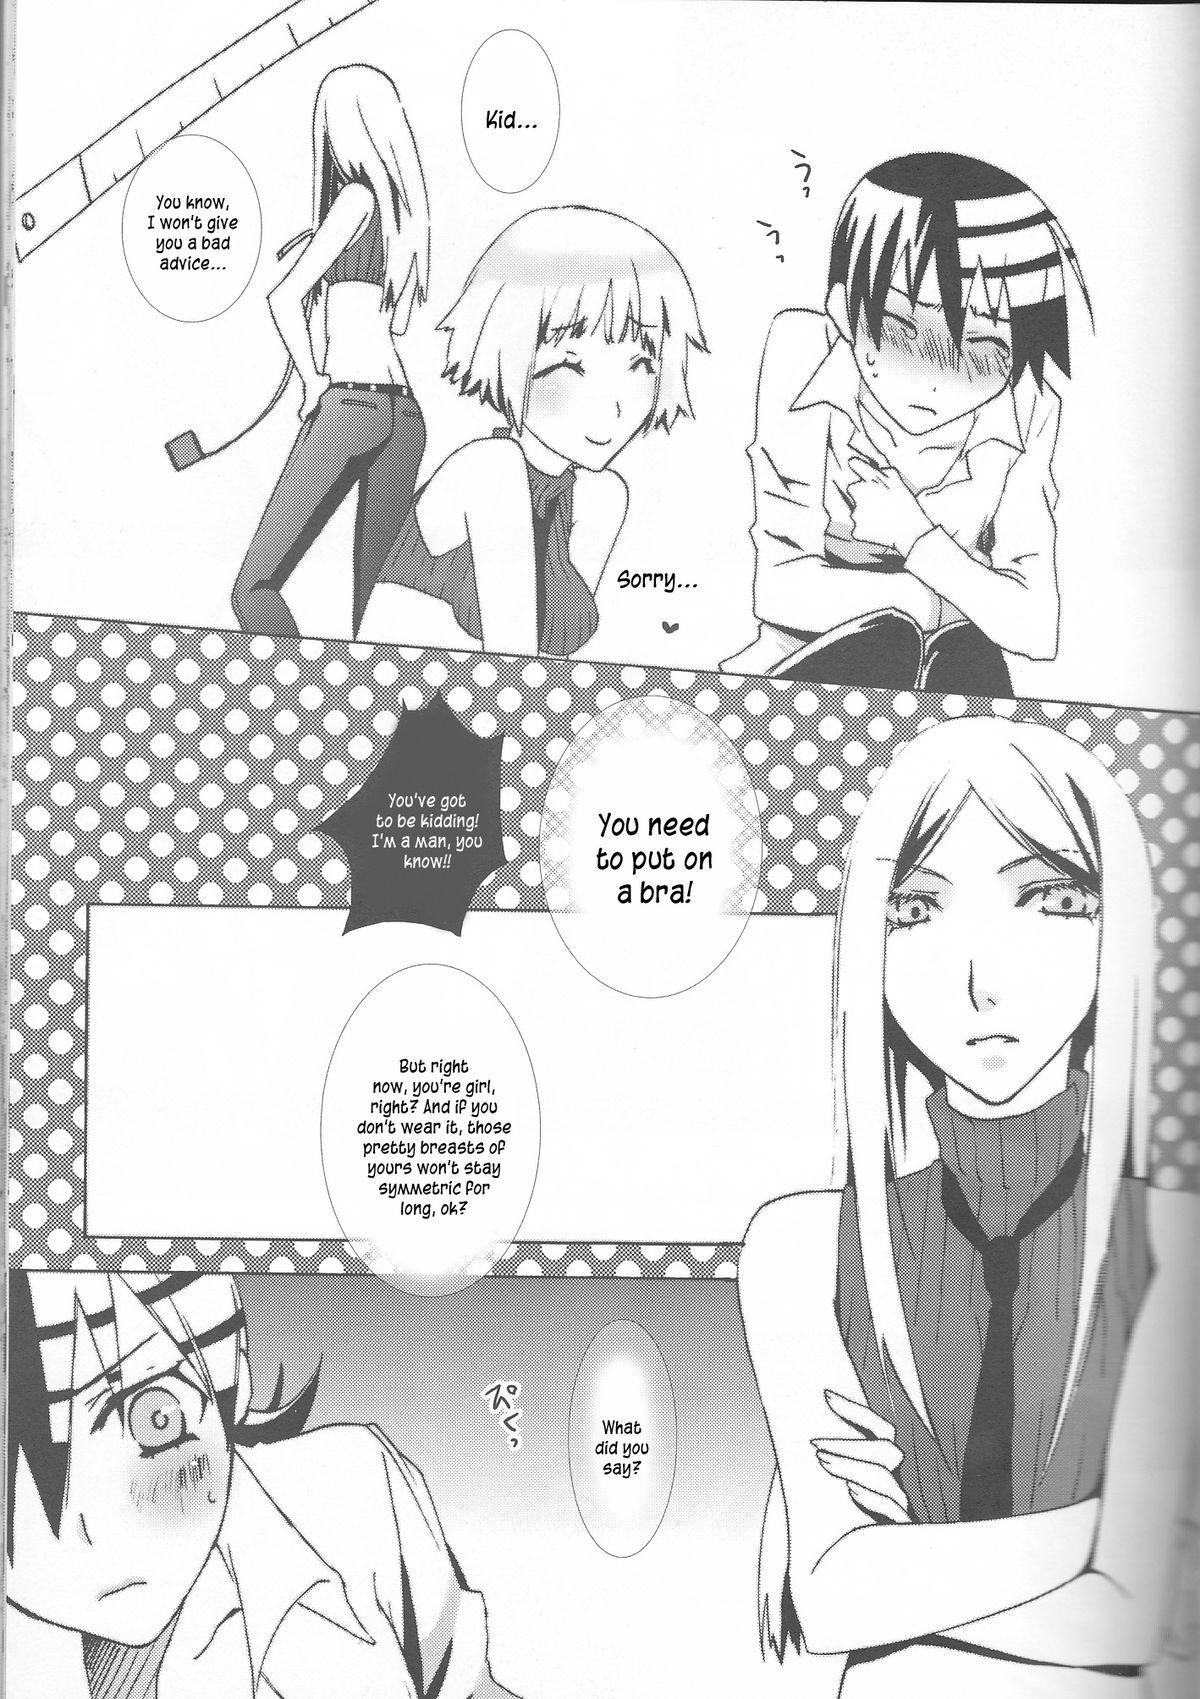 Classic Camical Candy Show Case - Soul eater Babe - Page 12